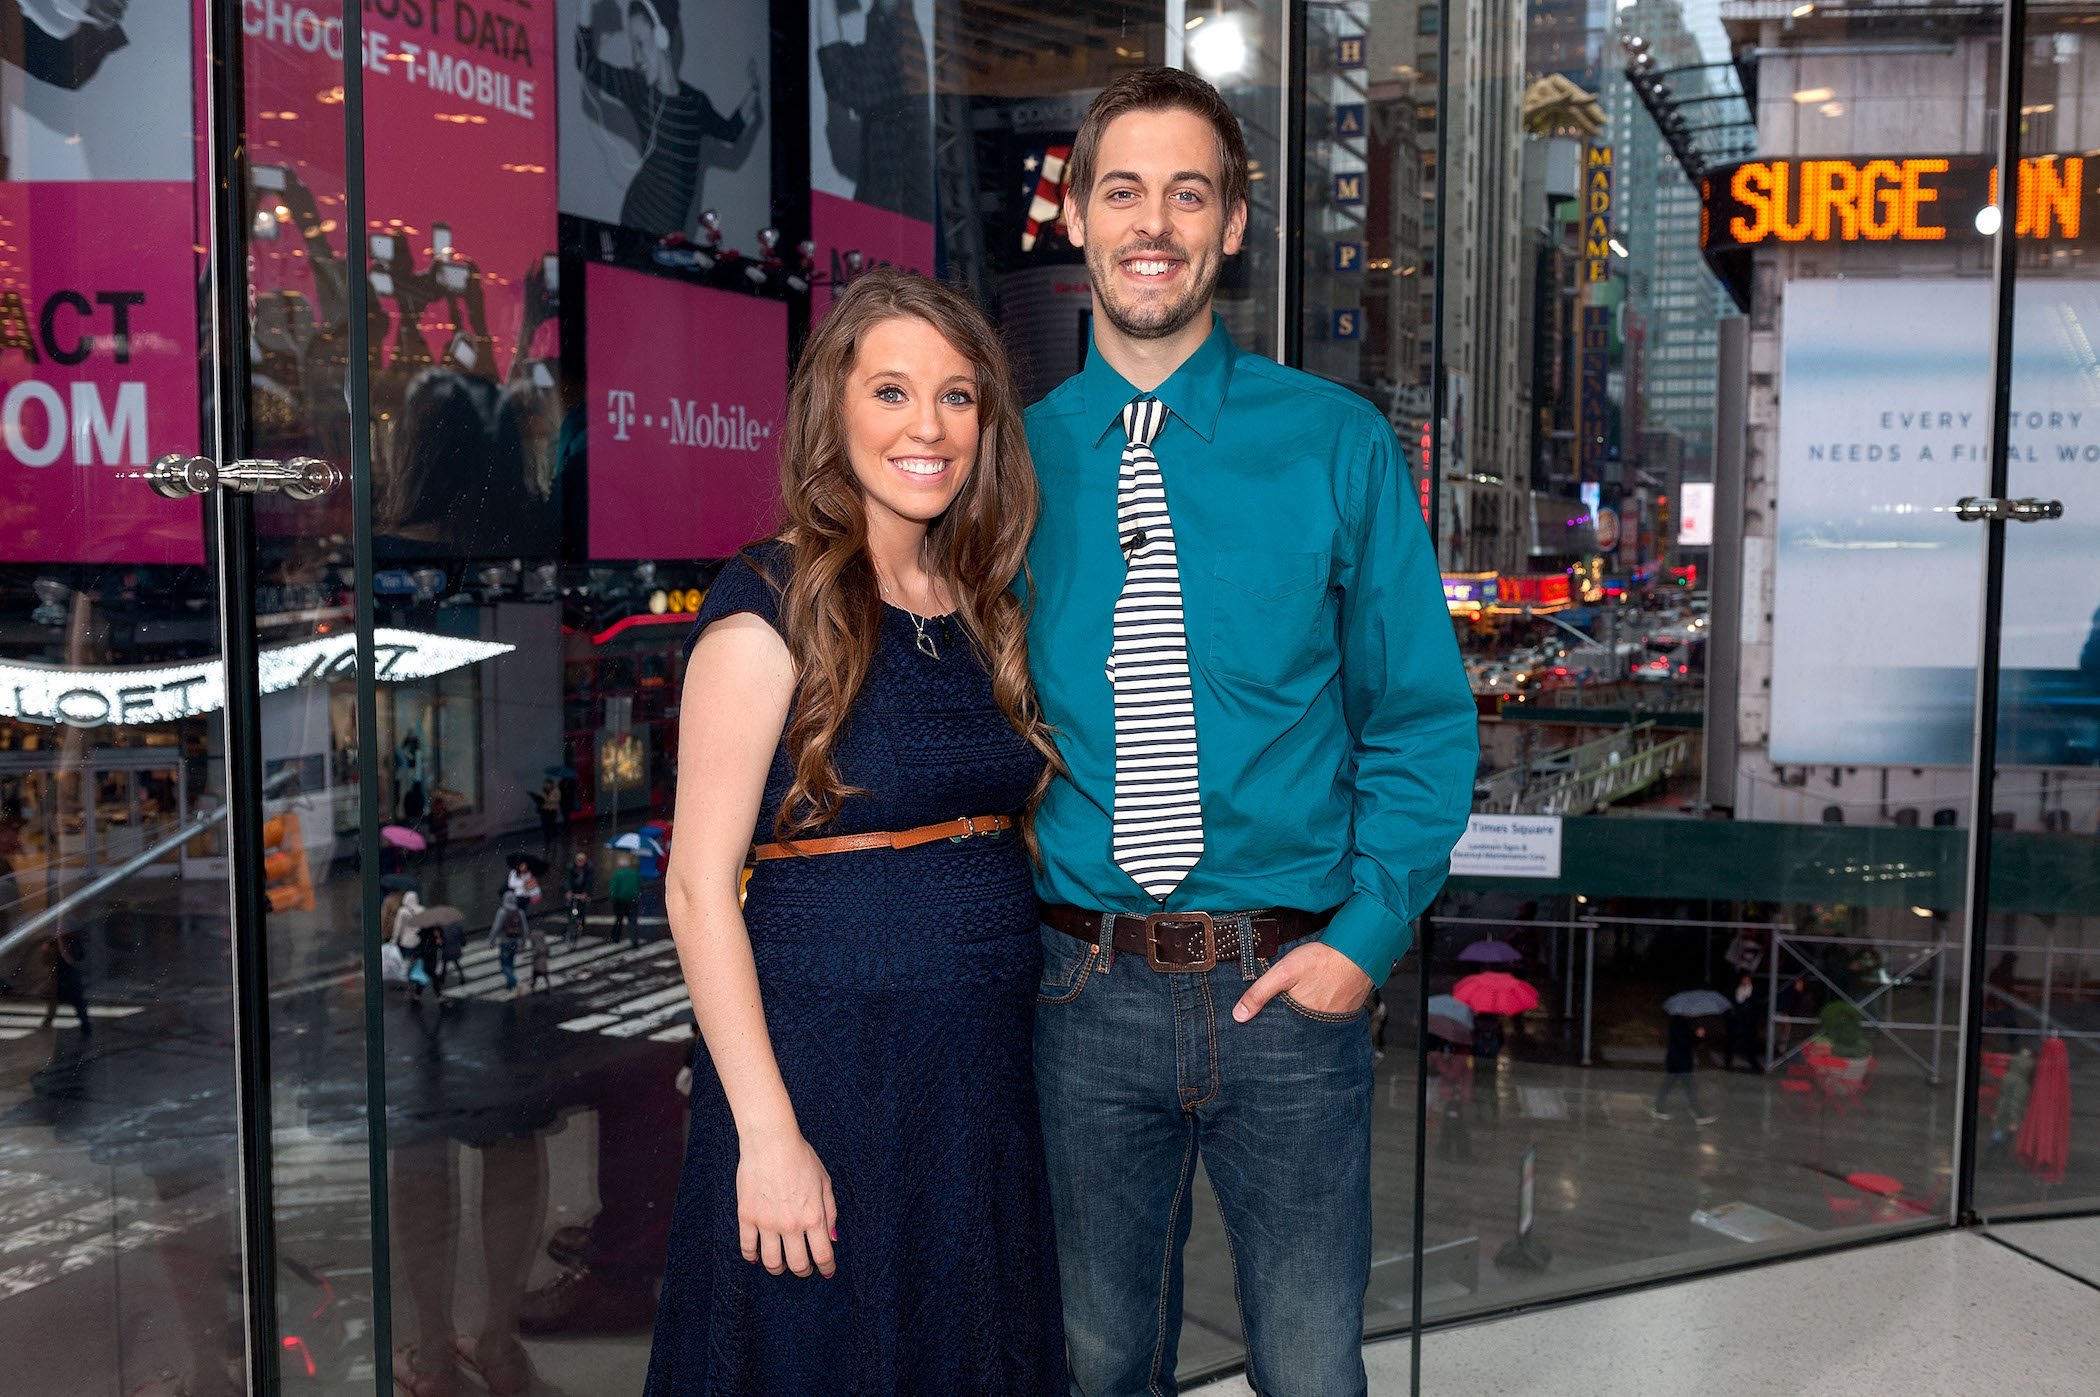 Jill Duggar Dillard (L) and husband Derick Dillard of the Duggar family standing together and smiling on the set of 'Extra'